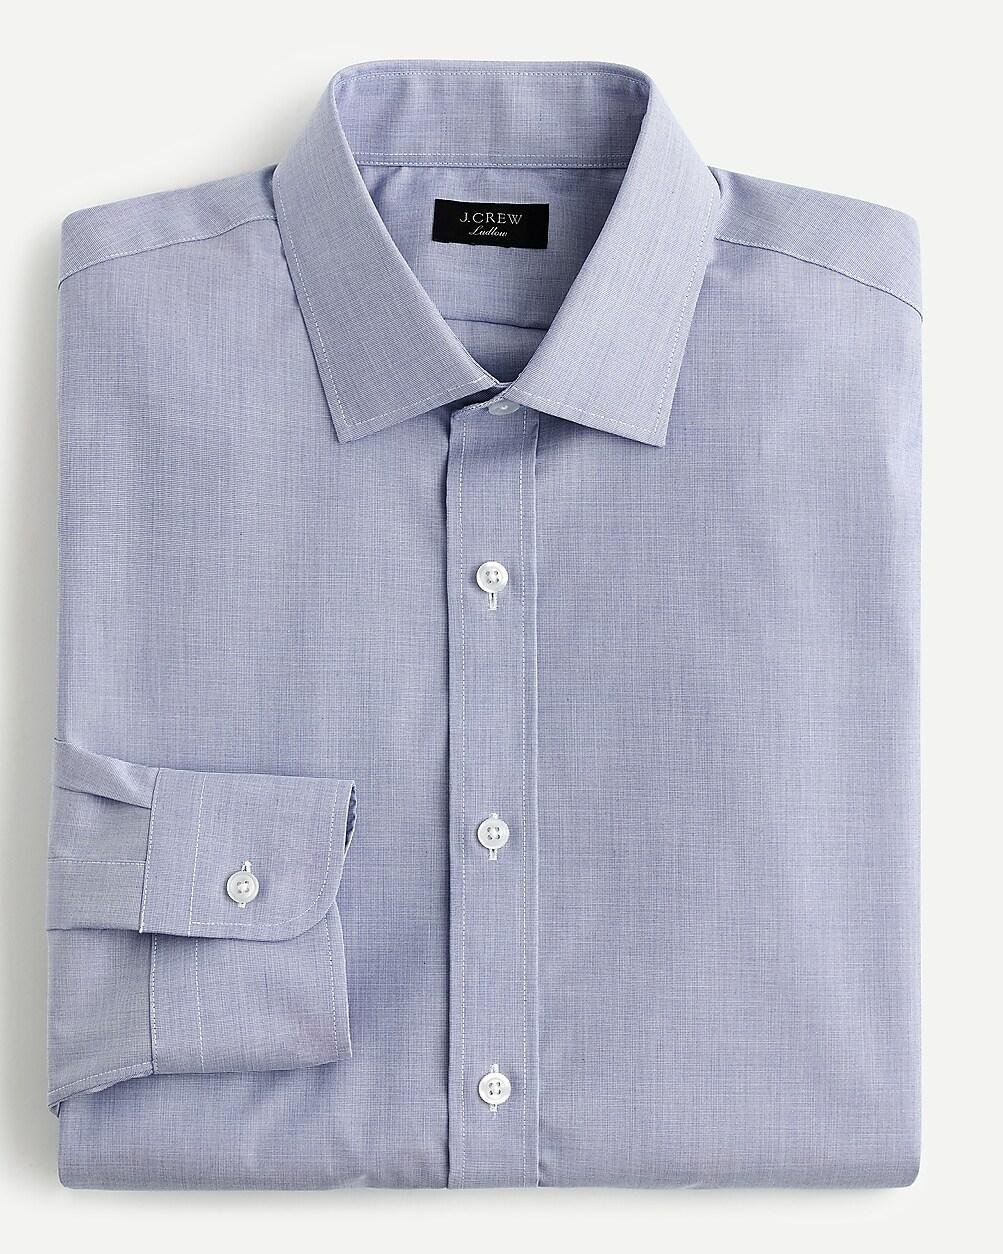 Ludlow stretch easy-care cotton poplin shirts in end-on-end cotton by J.CREW